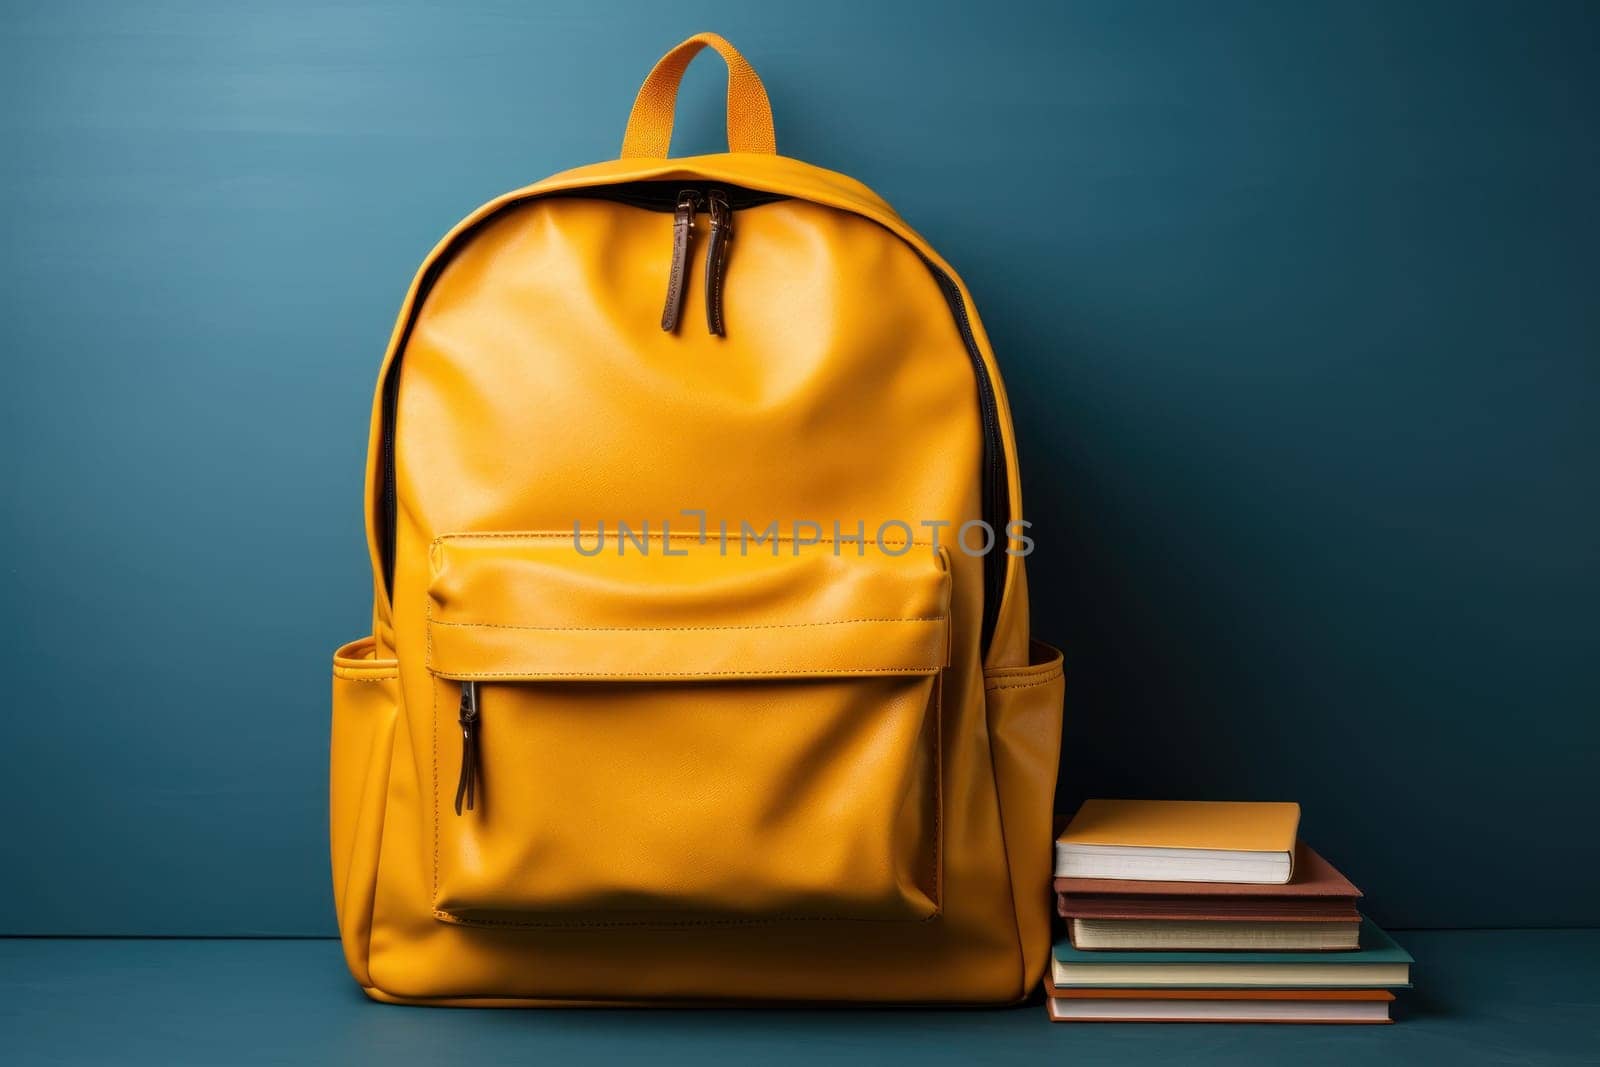 Yellow bag and notebook, pencil on wooden table, Back to School concept, Generate Ai.